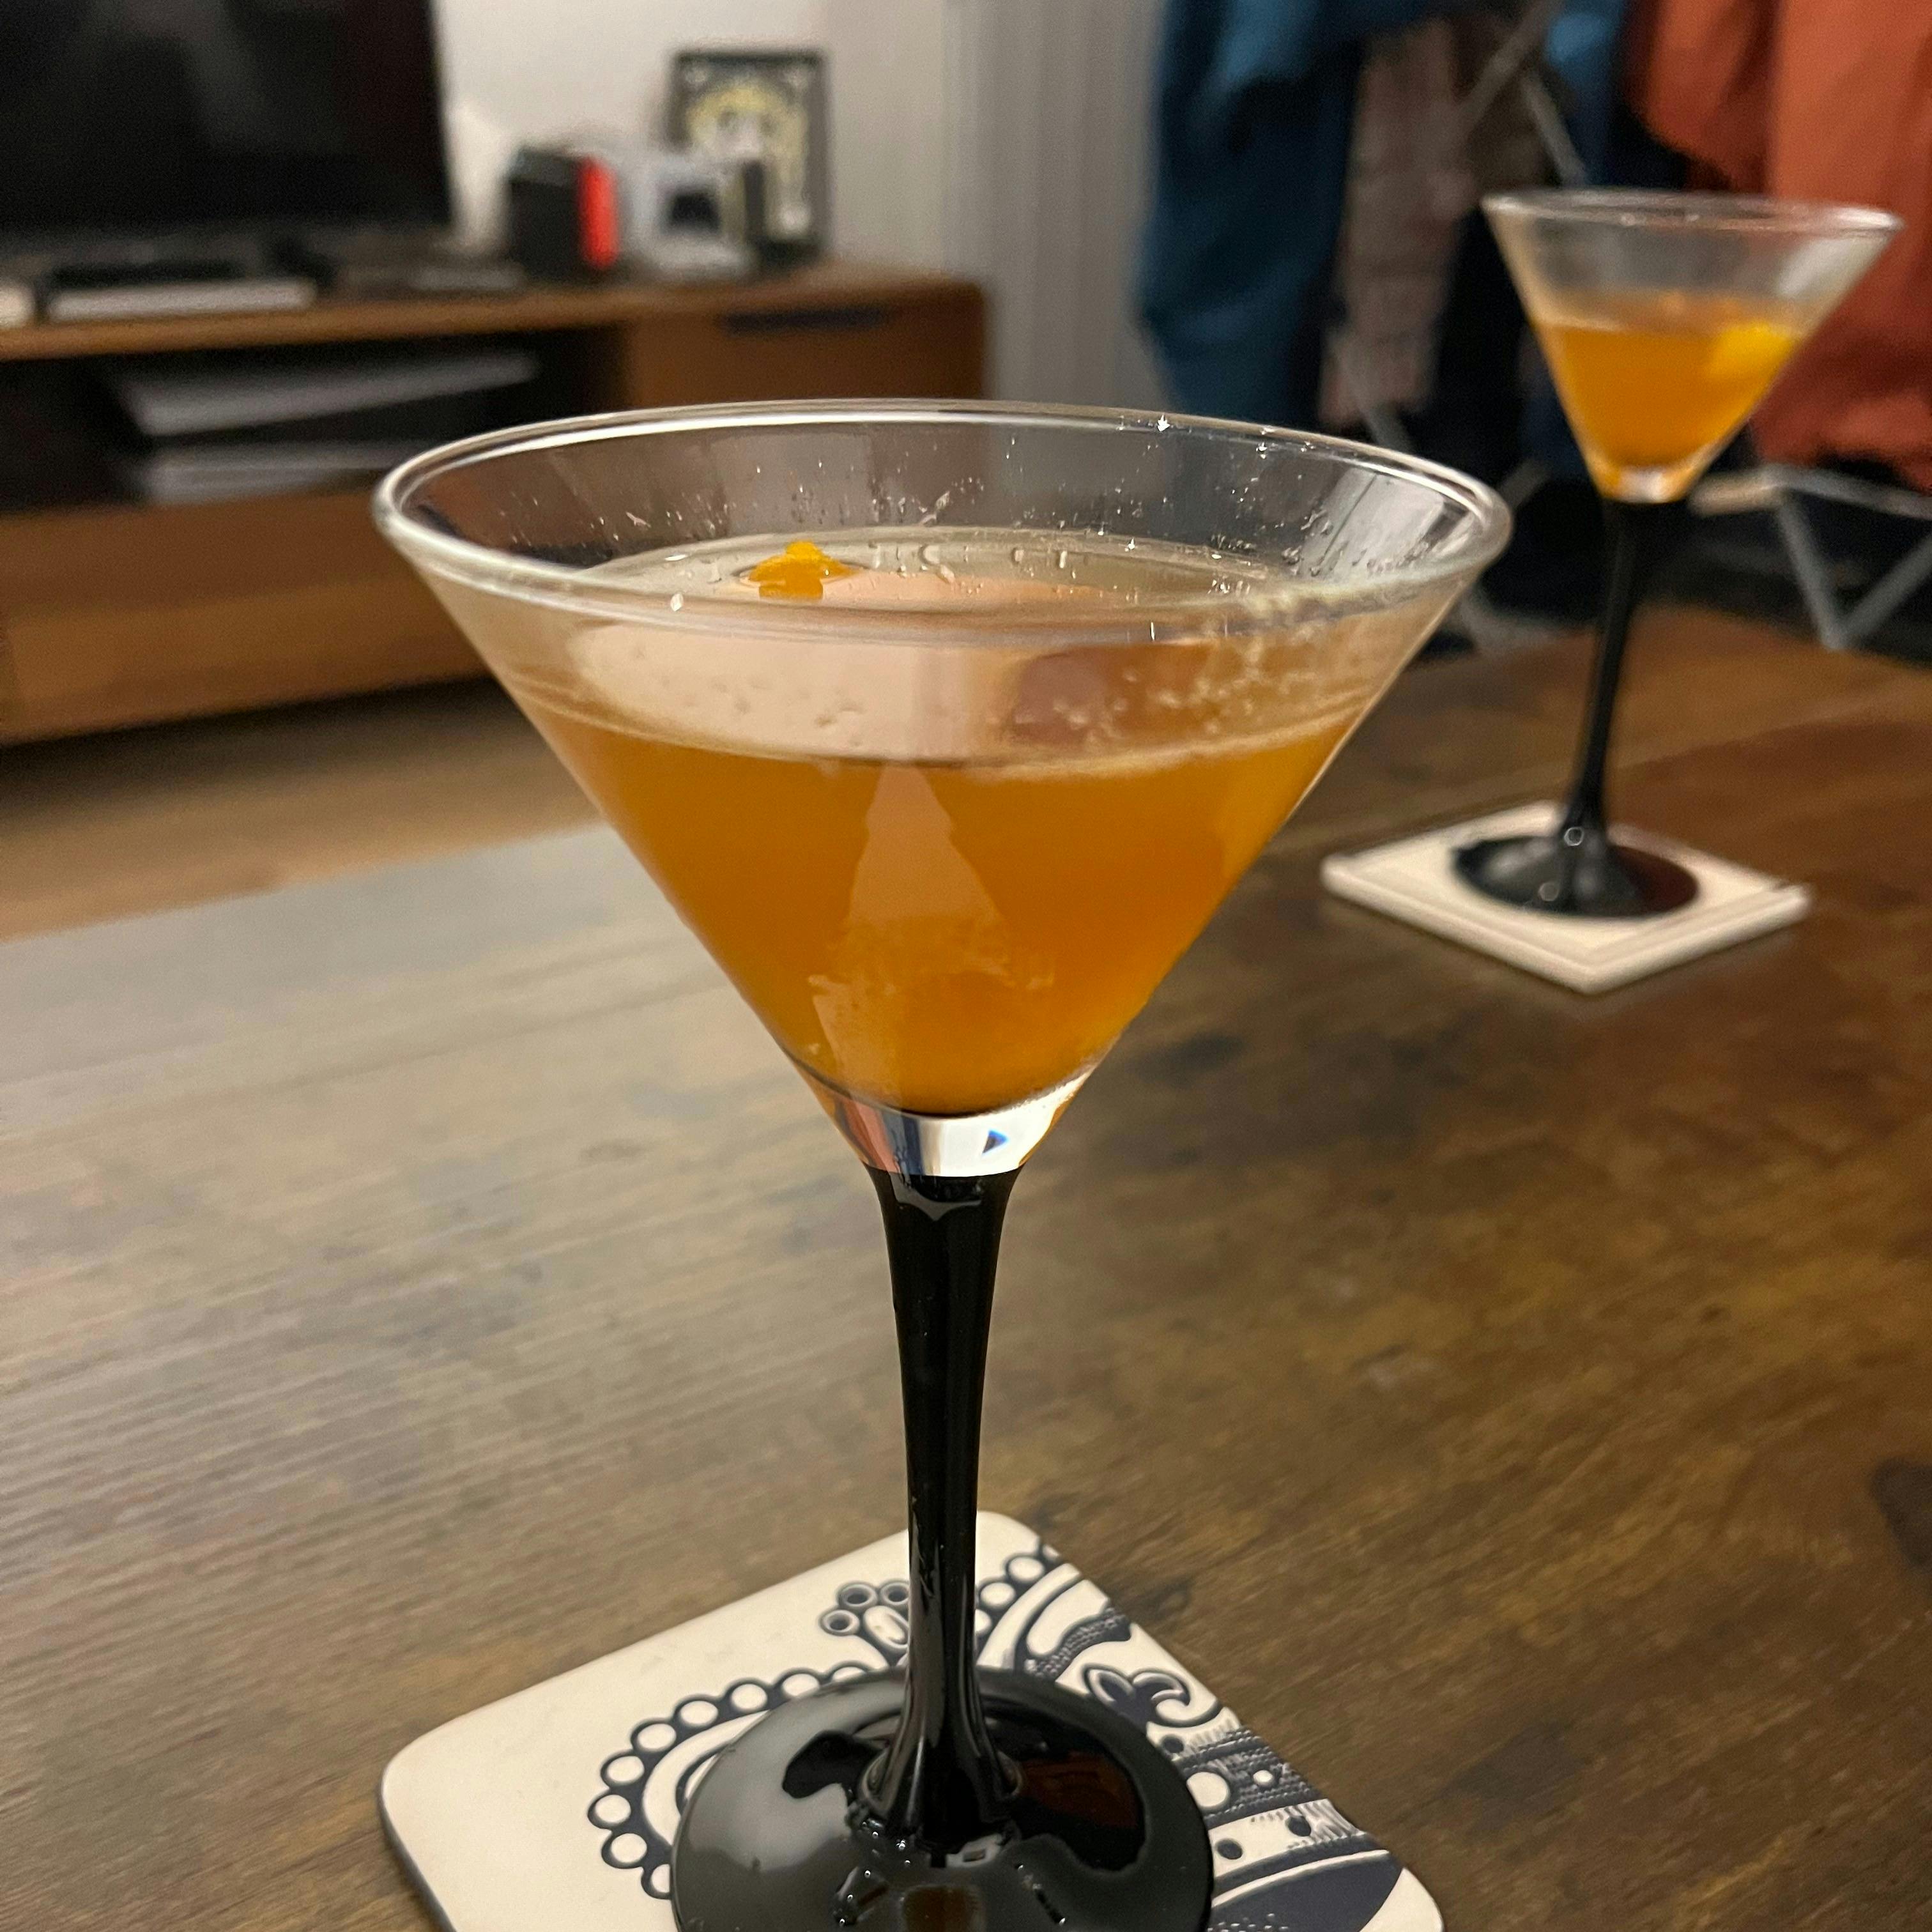 A martini glass with an orange cocktail in it